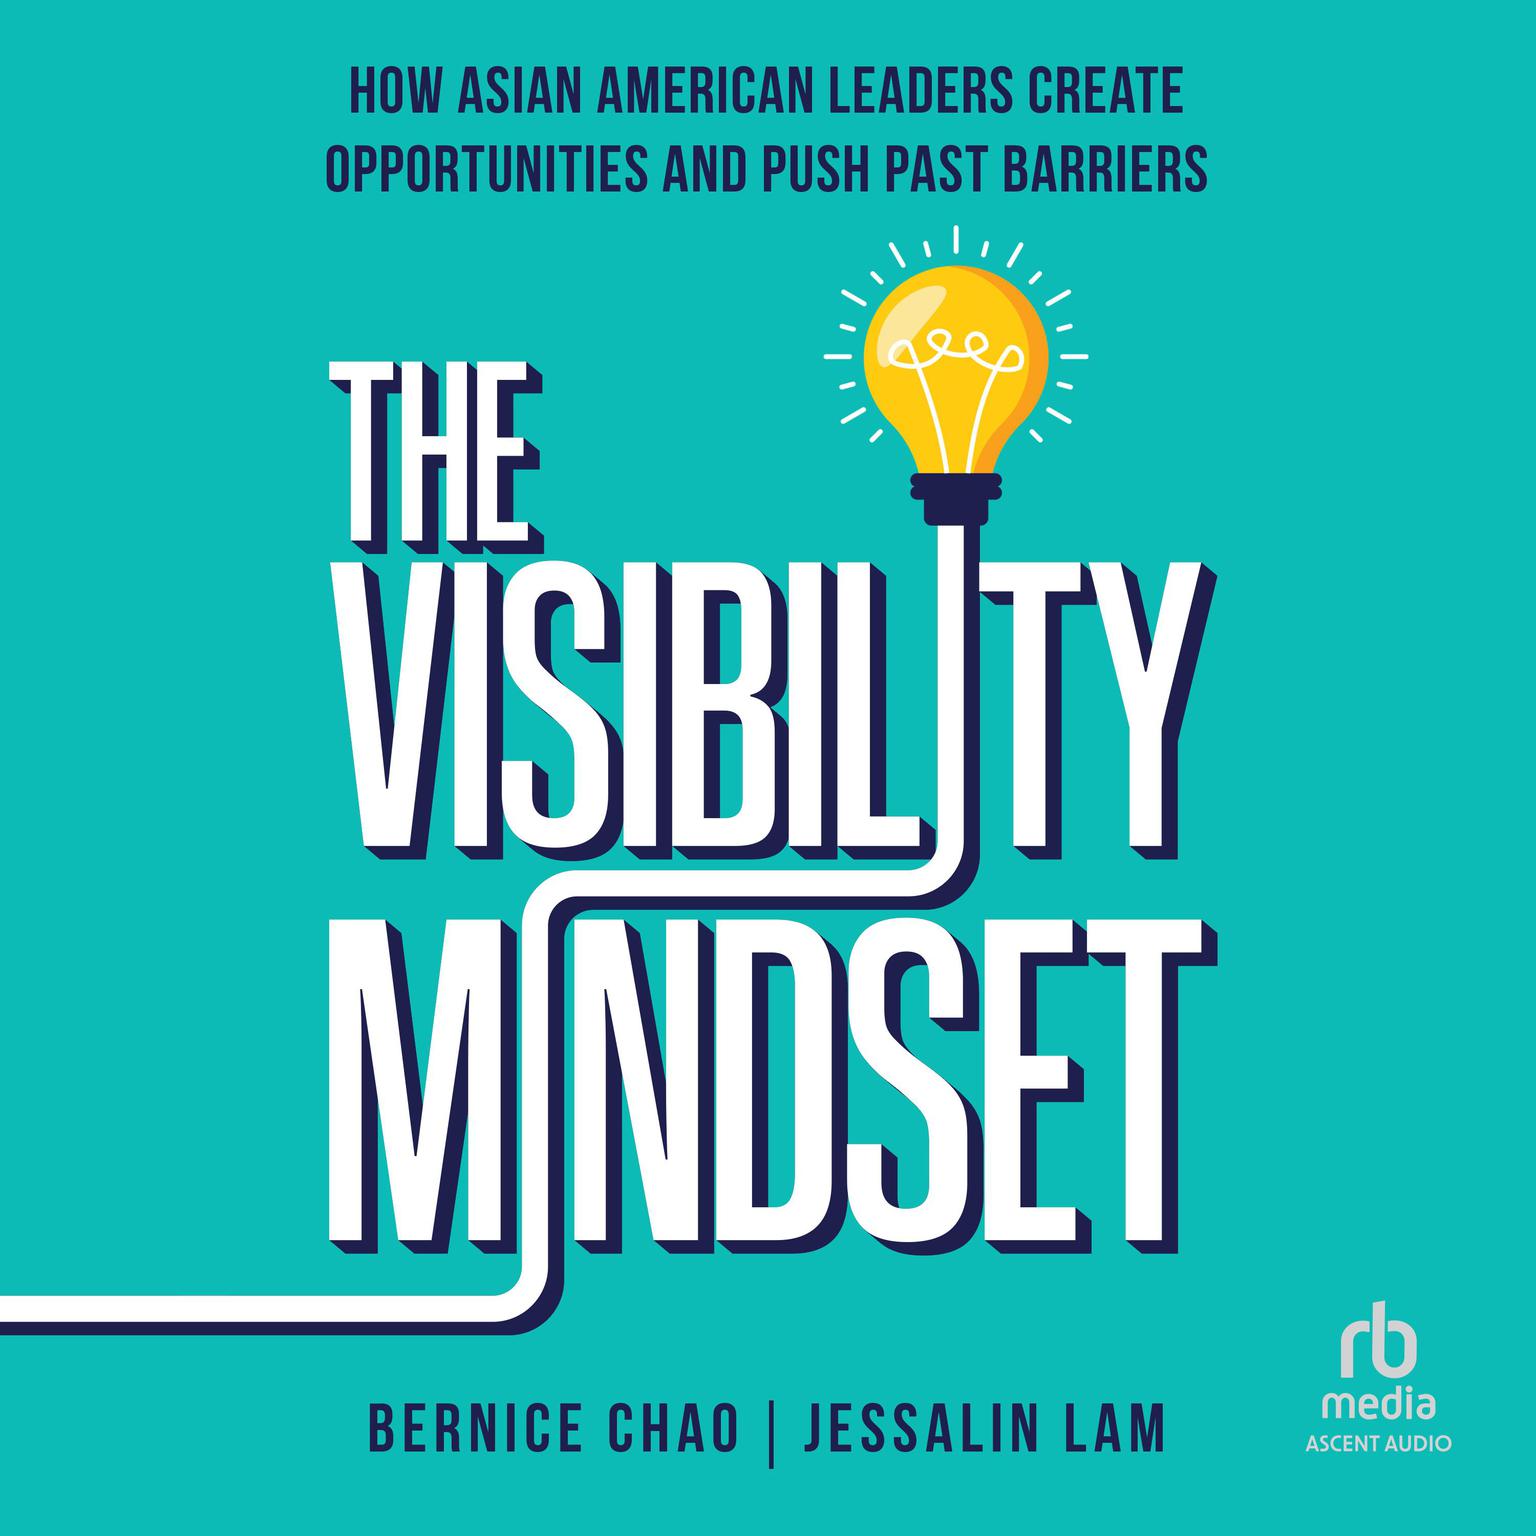 The Visibility Mindset: How Asian American Leaders Create Opportunities and Push Past Barriers Audiobook, by Bernice Chao